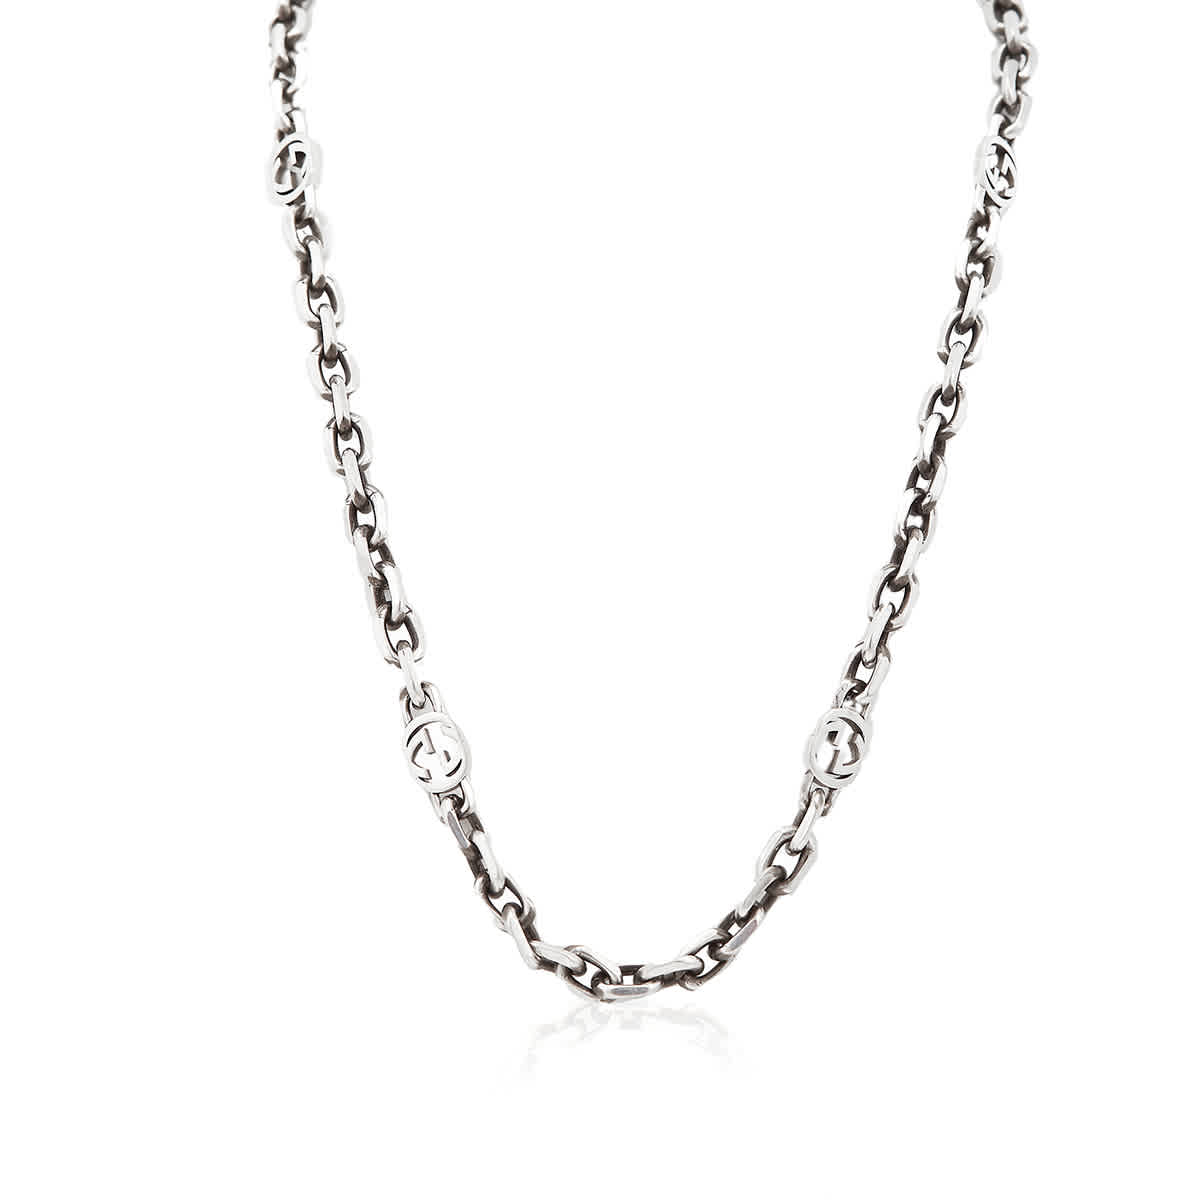 Gucci Men's Sterling Silver Cable Chain GG Necklace